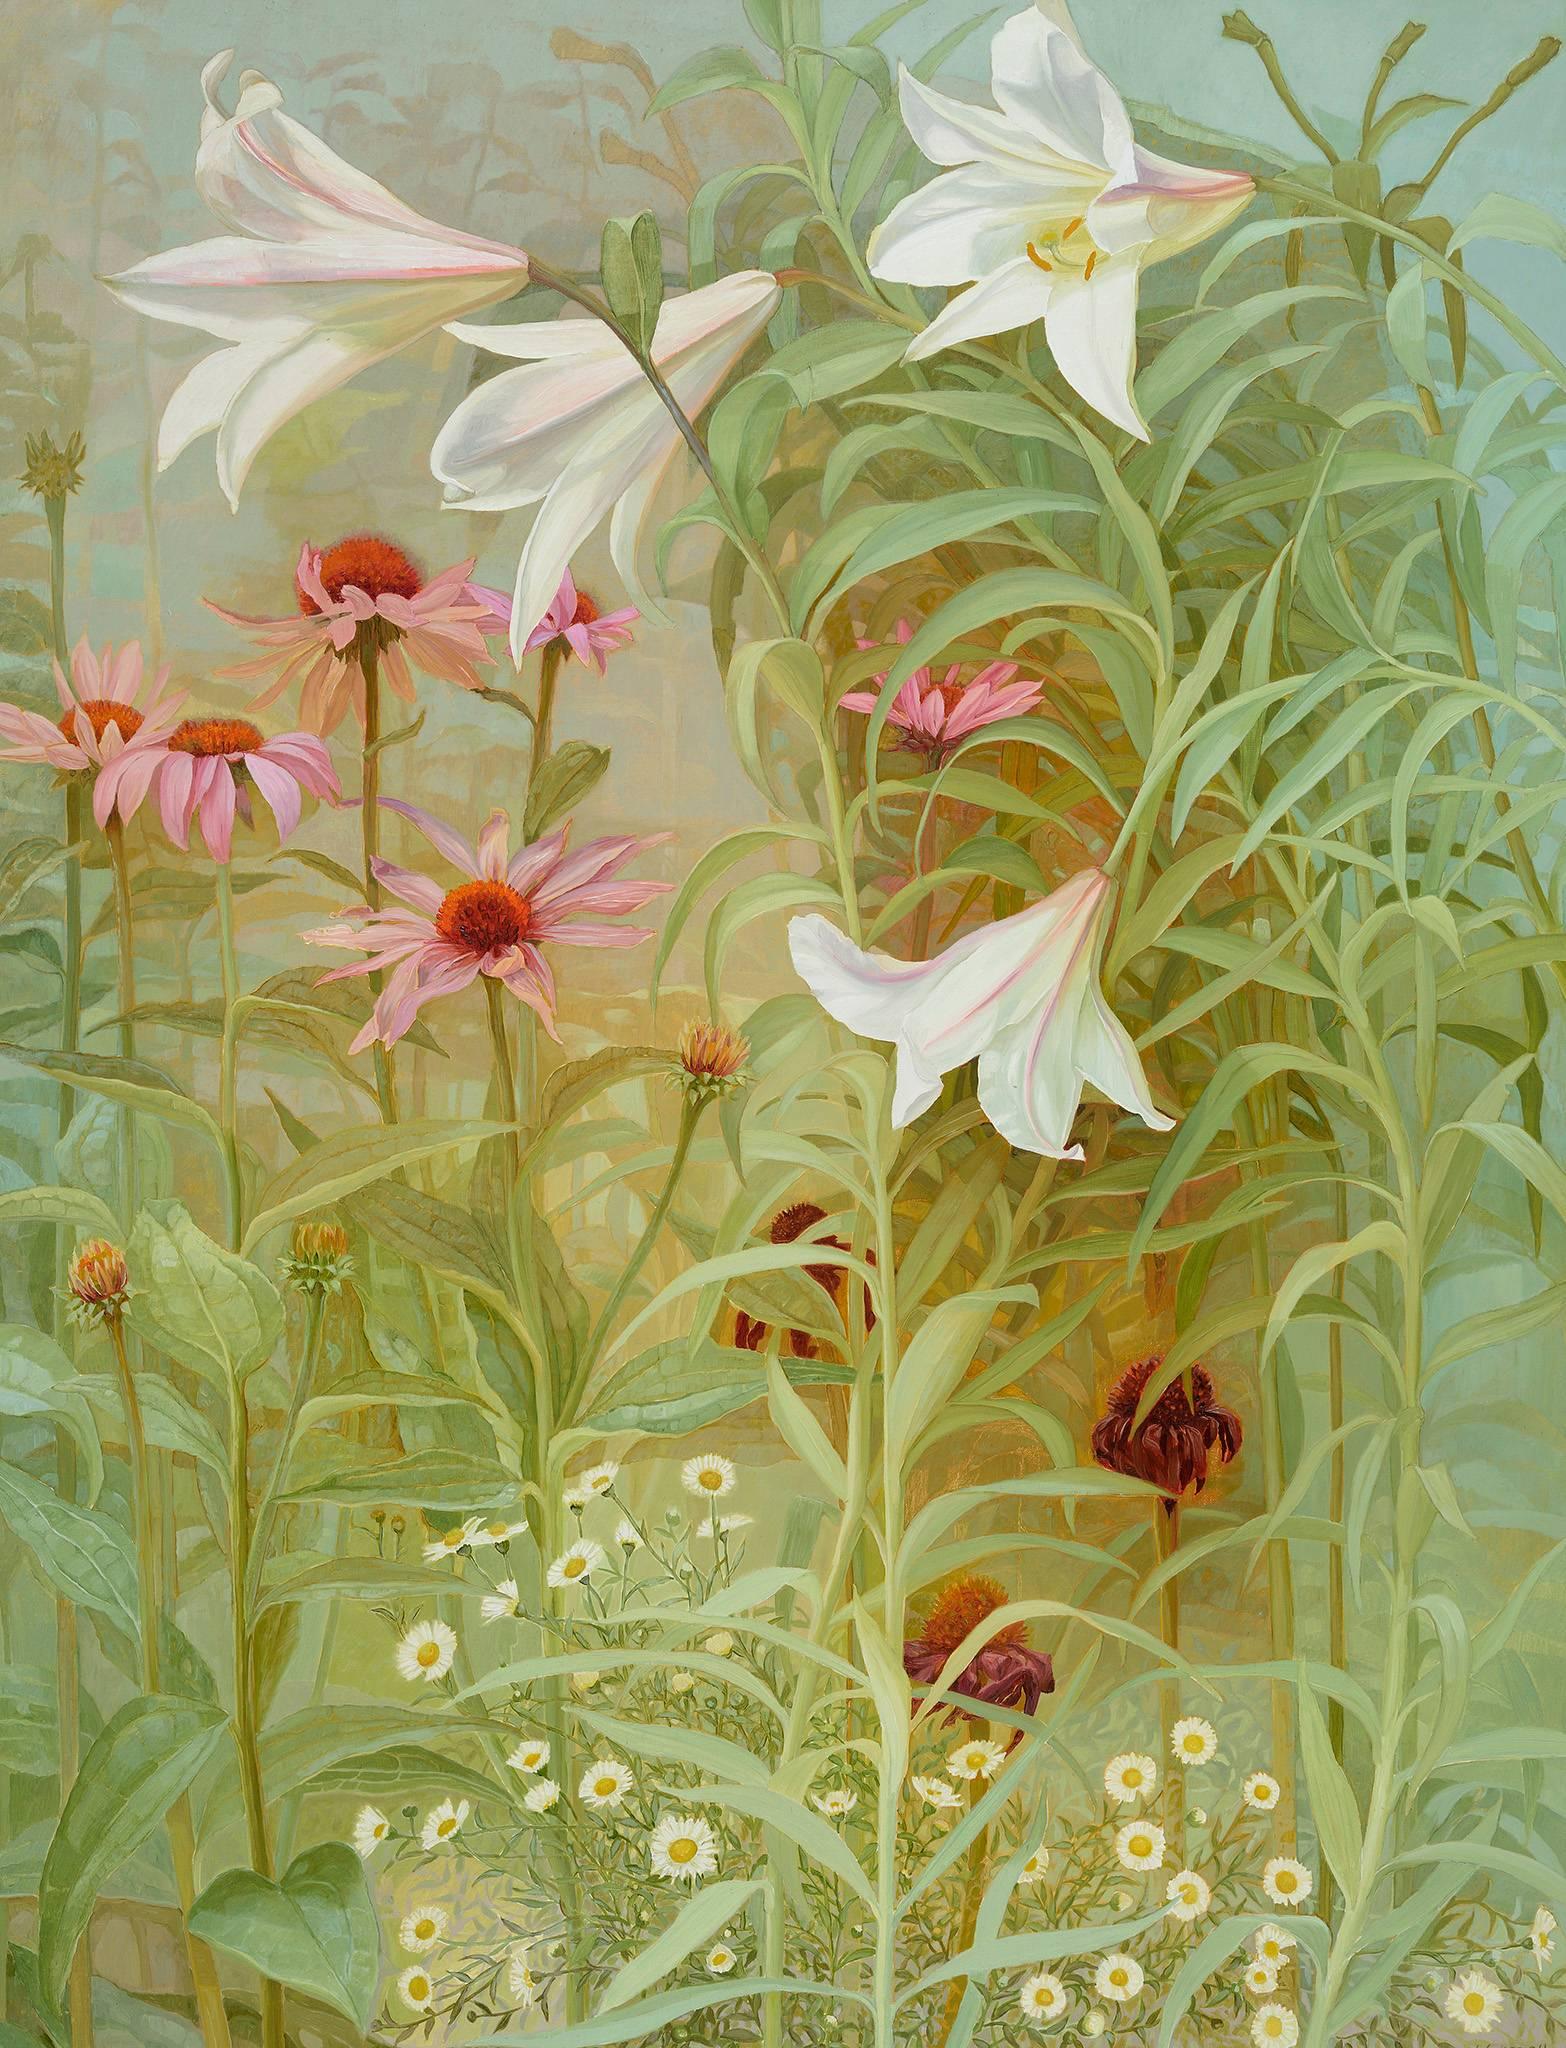 Jane Wormell Landscape Painting - Lilies, Echinacea and Daisies